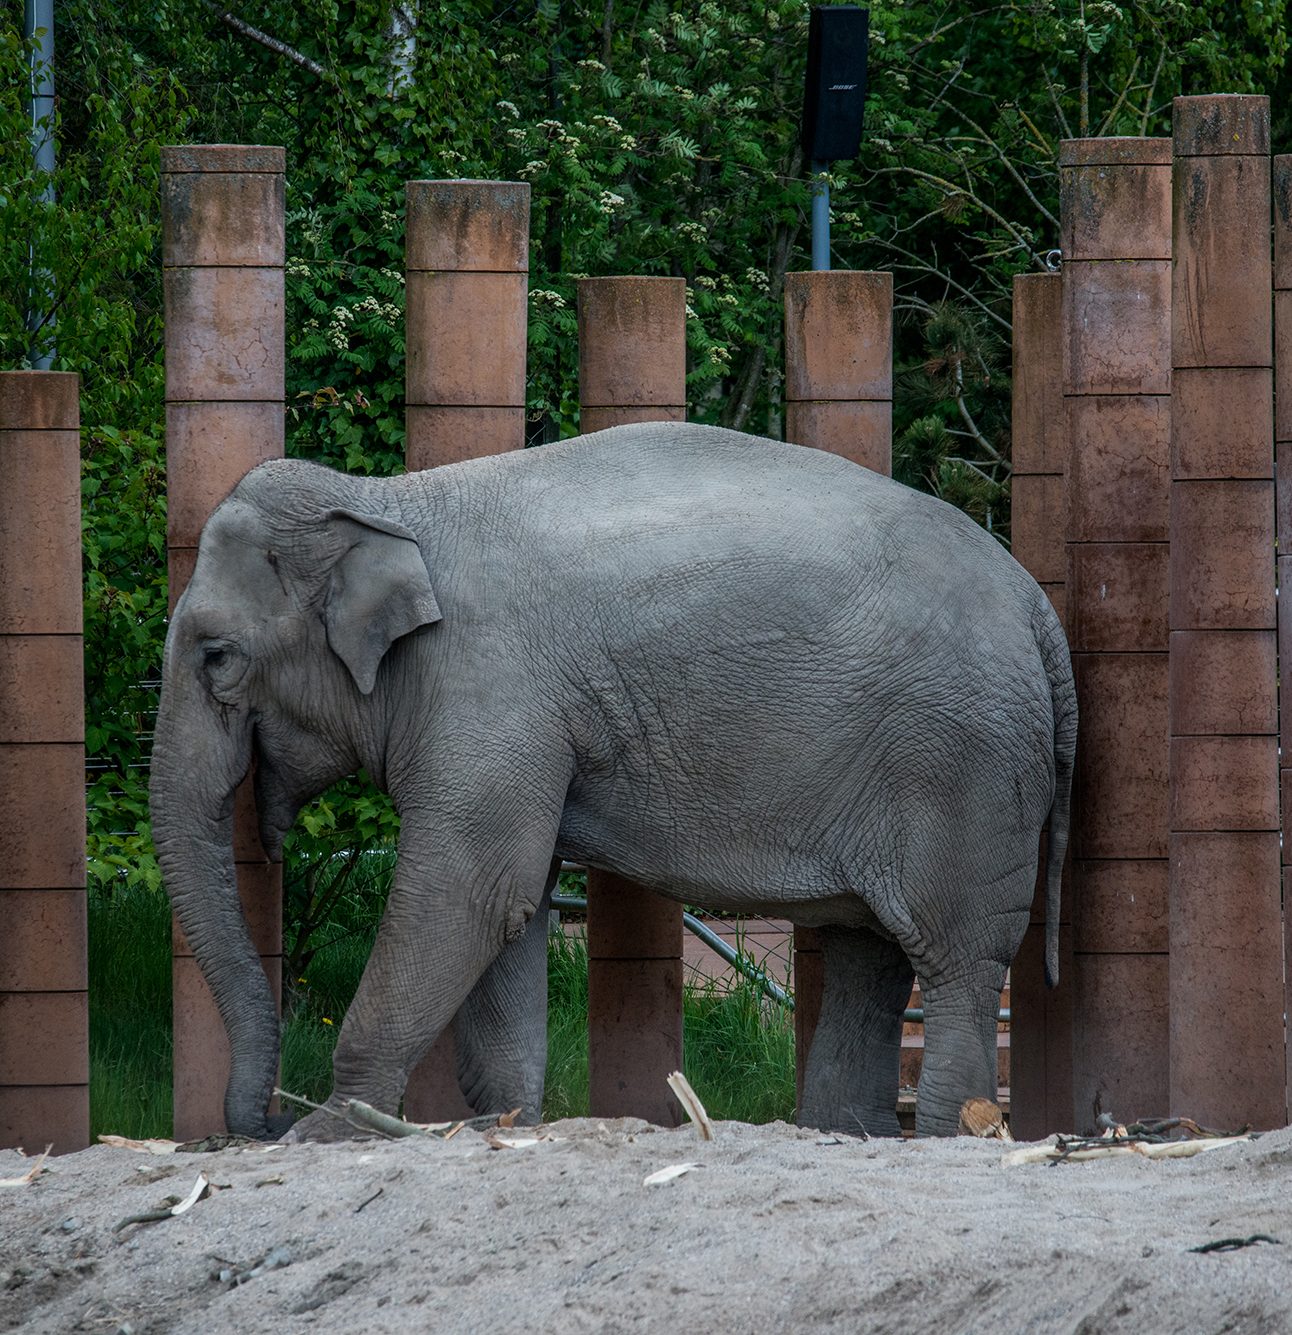 An elephant stands in front of a bamboo fence